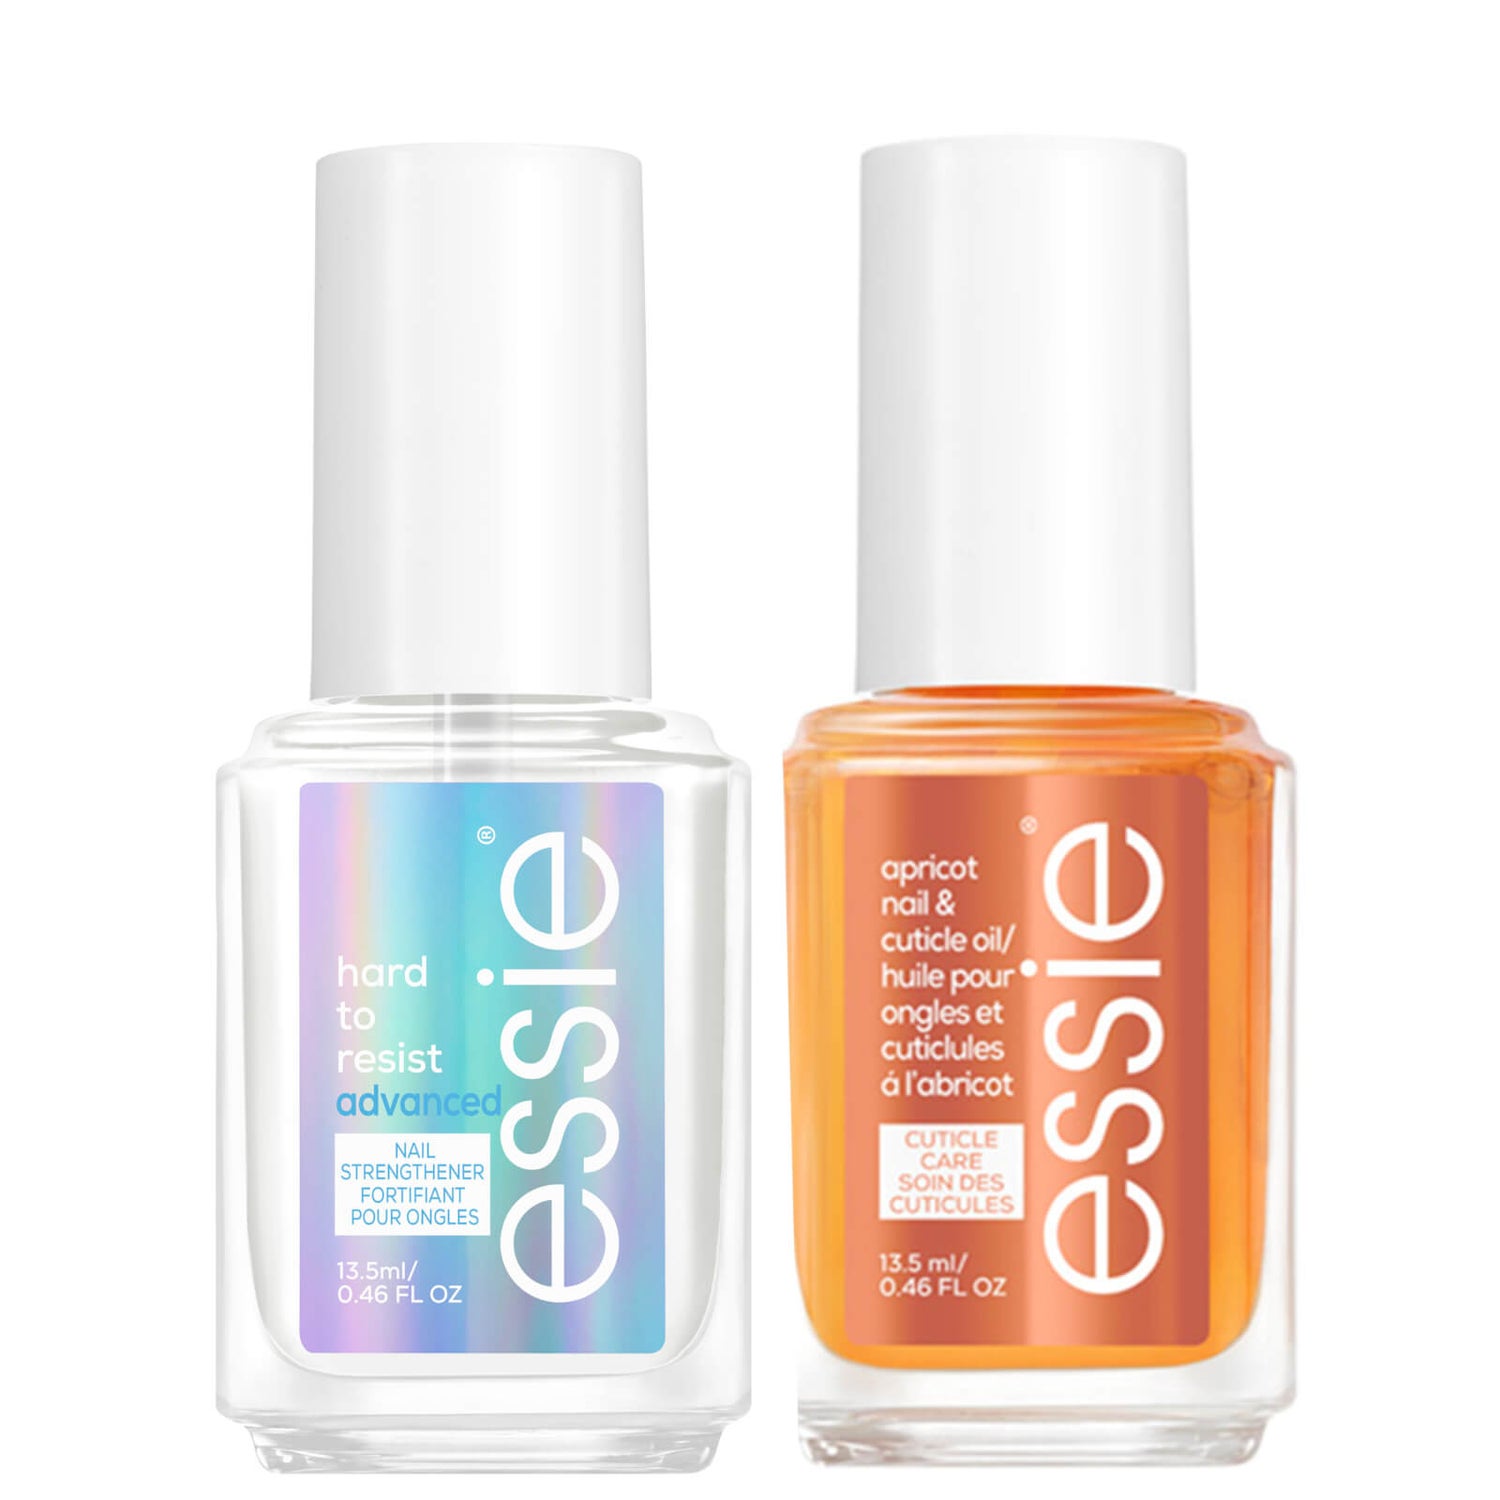 essie Nail Care Hard to Resist Advanced and Cuticle Oil Apricot Treatment  Duo Kit - Gratis Lieferservice weltweit